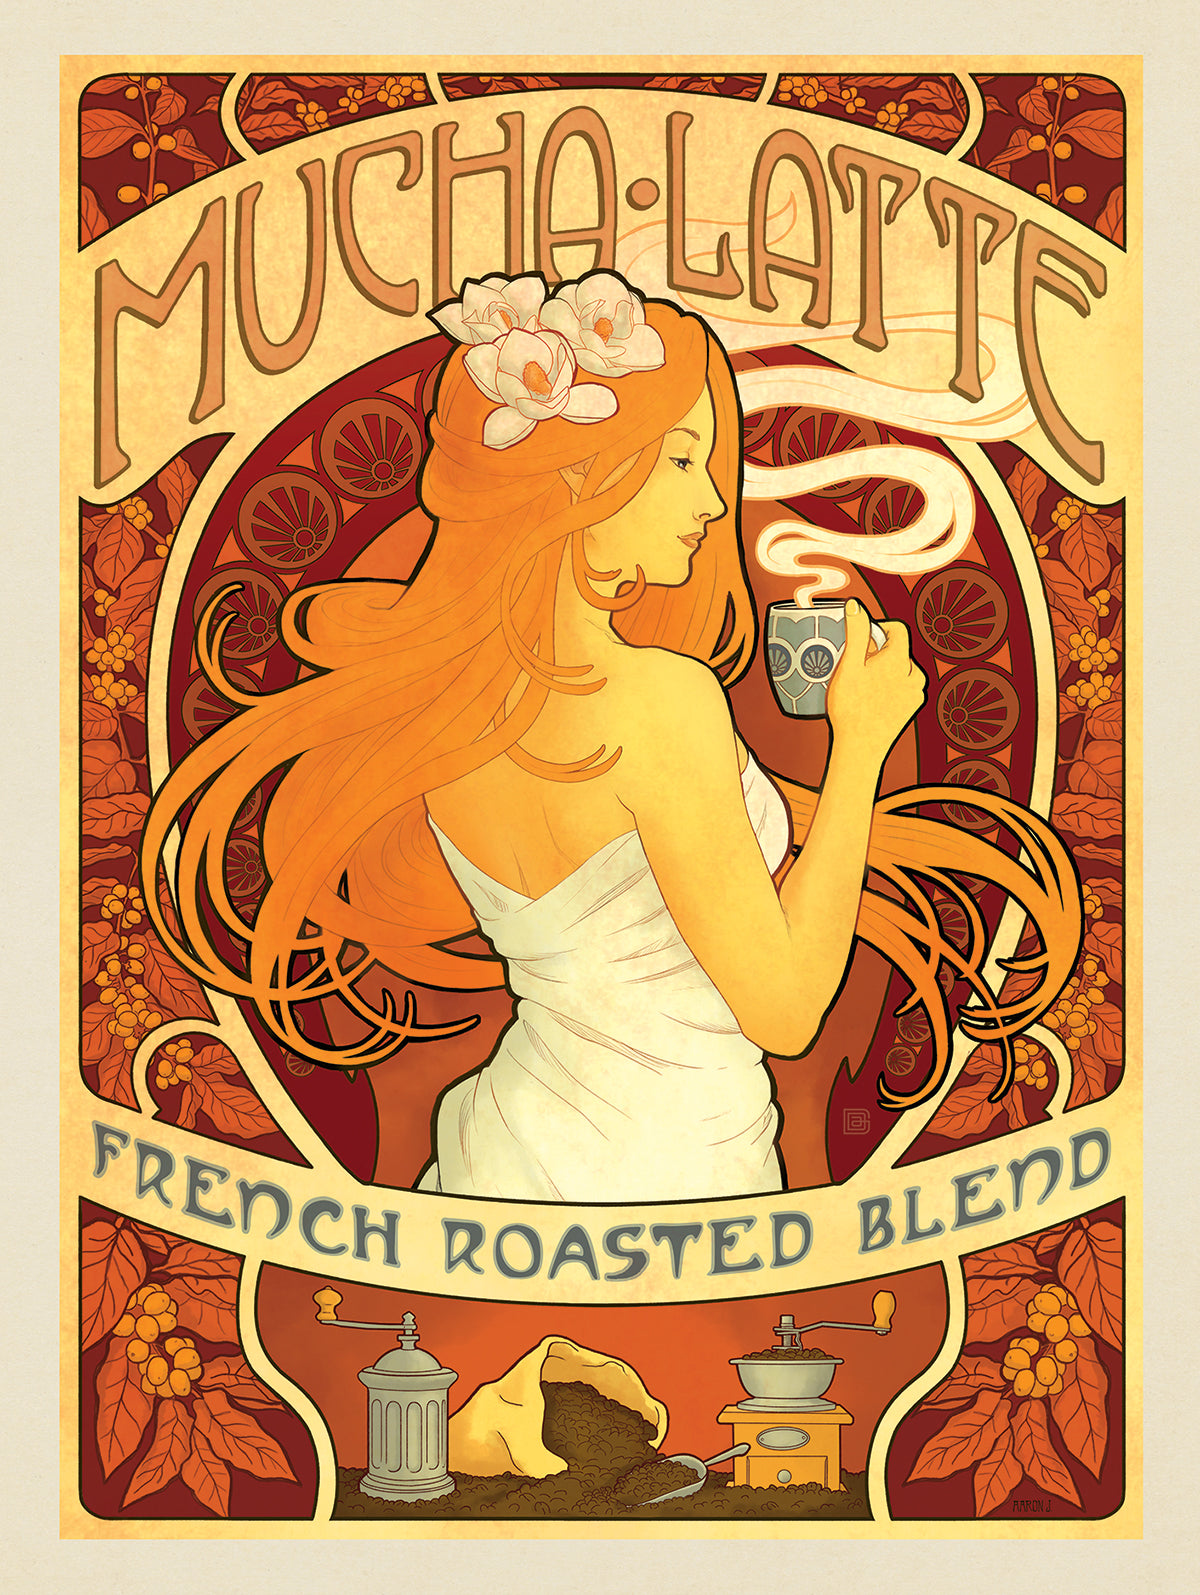 How Do You Take Your Coffee? We Take Ours with a Side of Vintage Poster Art!